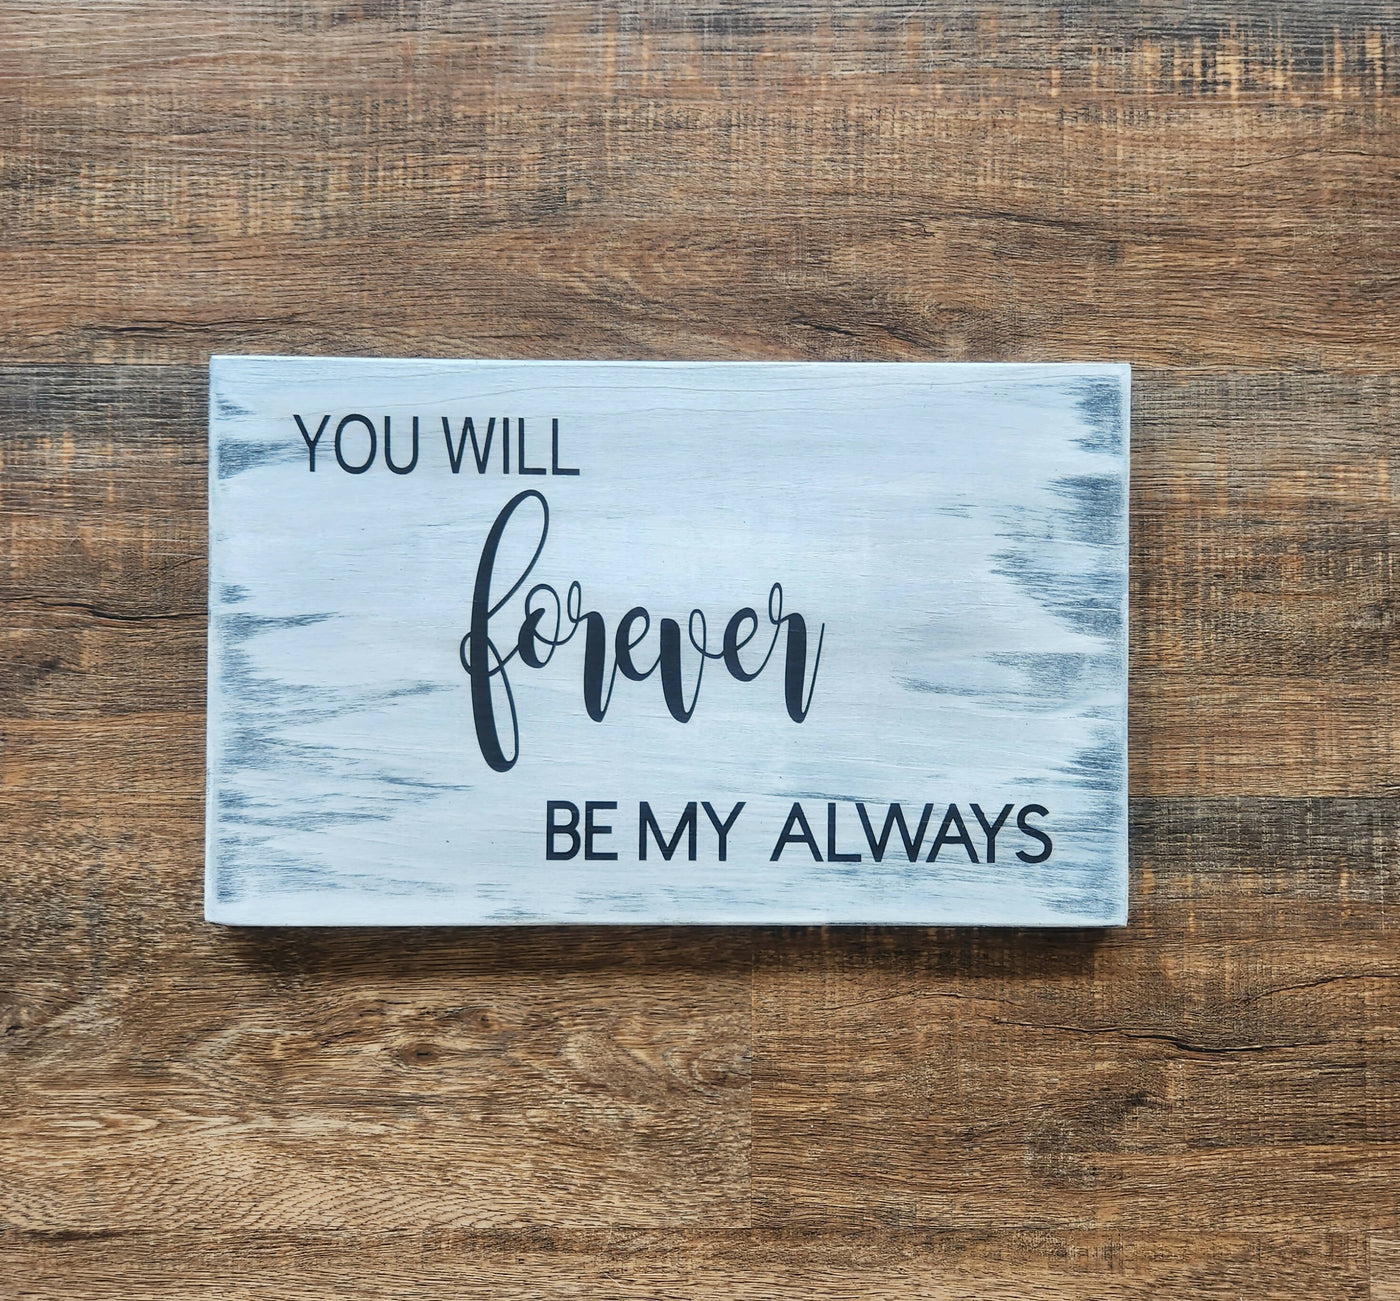 You will forever be my always.. Sign